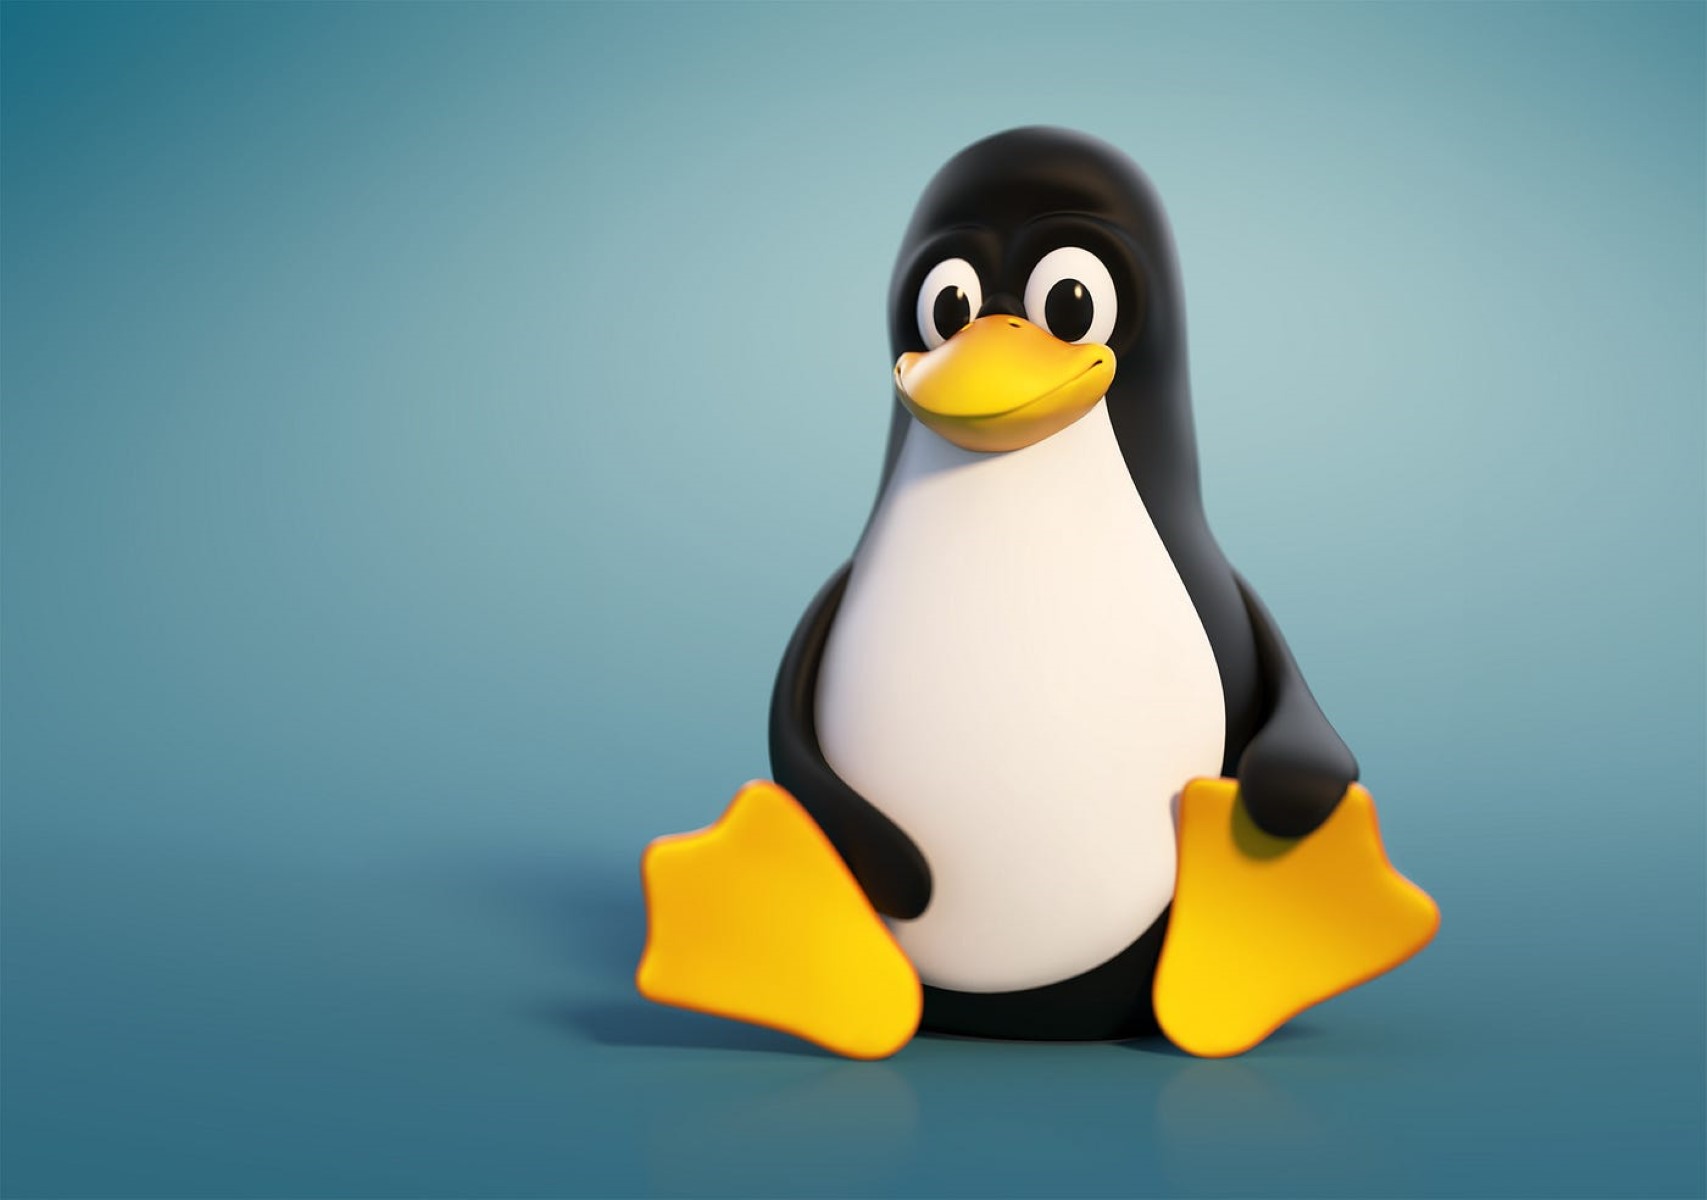 what-is-the-name-of-the-built-in-firewall-on-most-linux-distributions